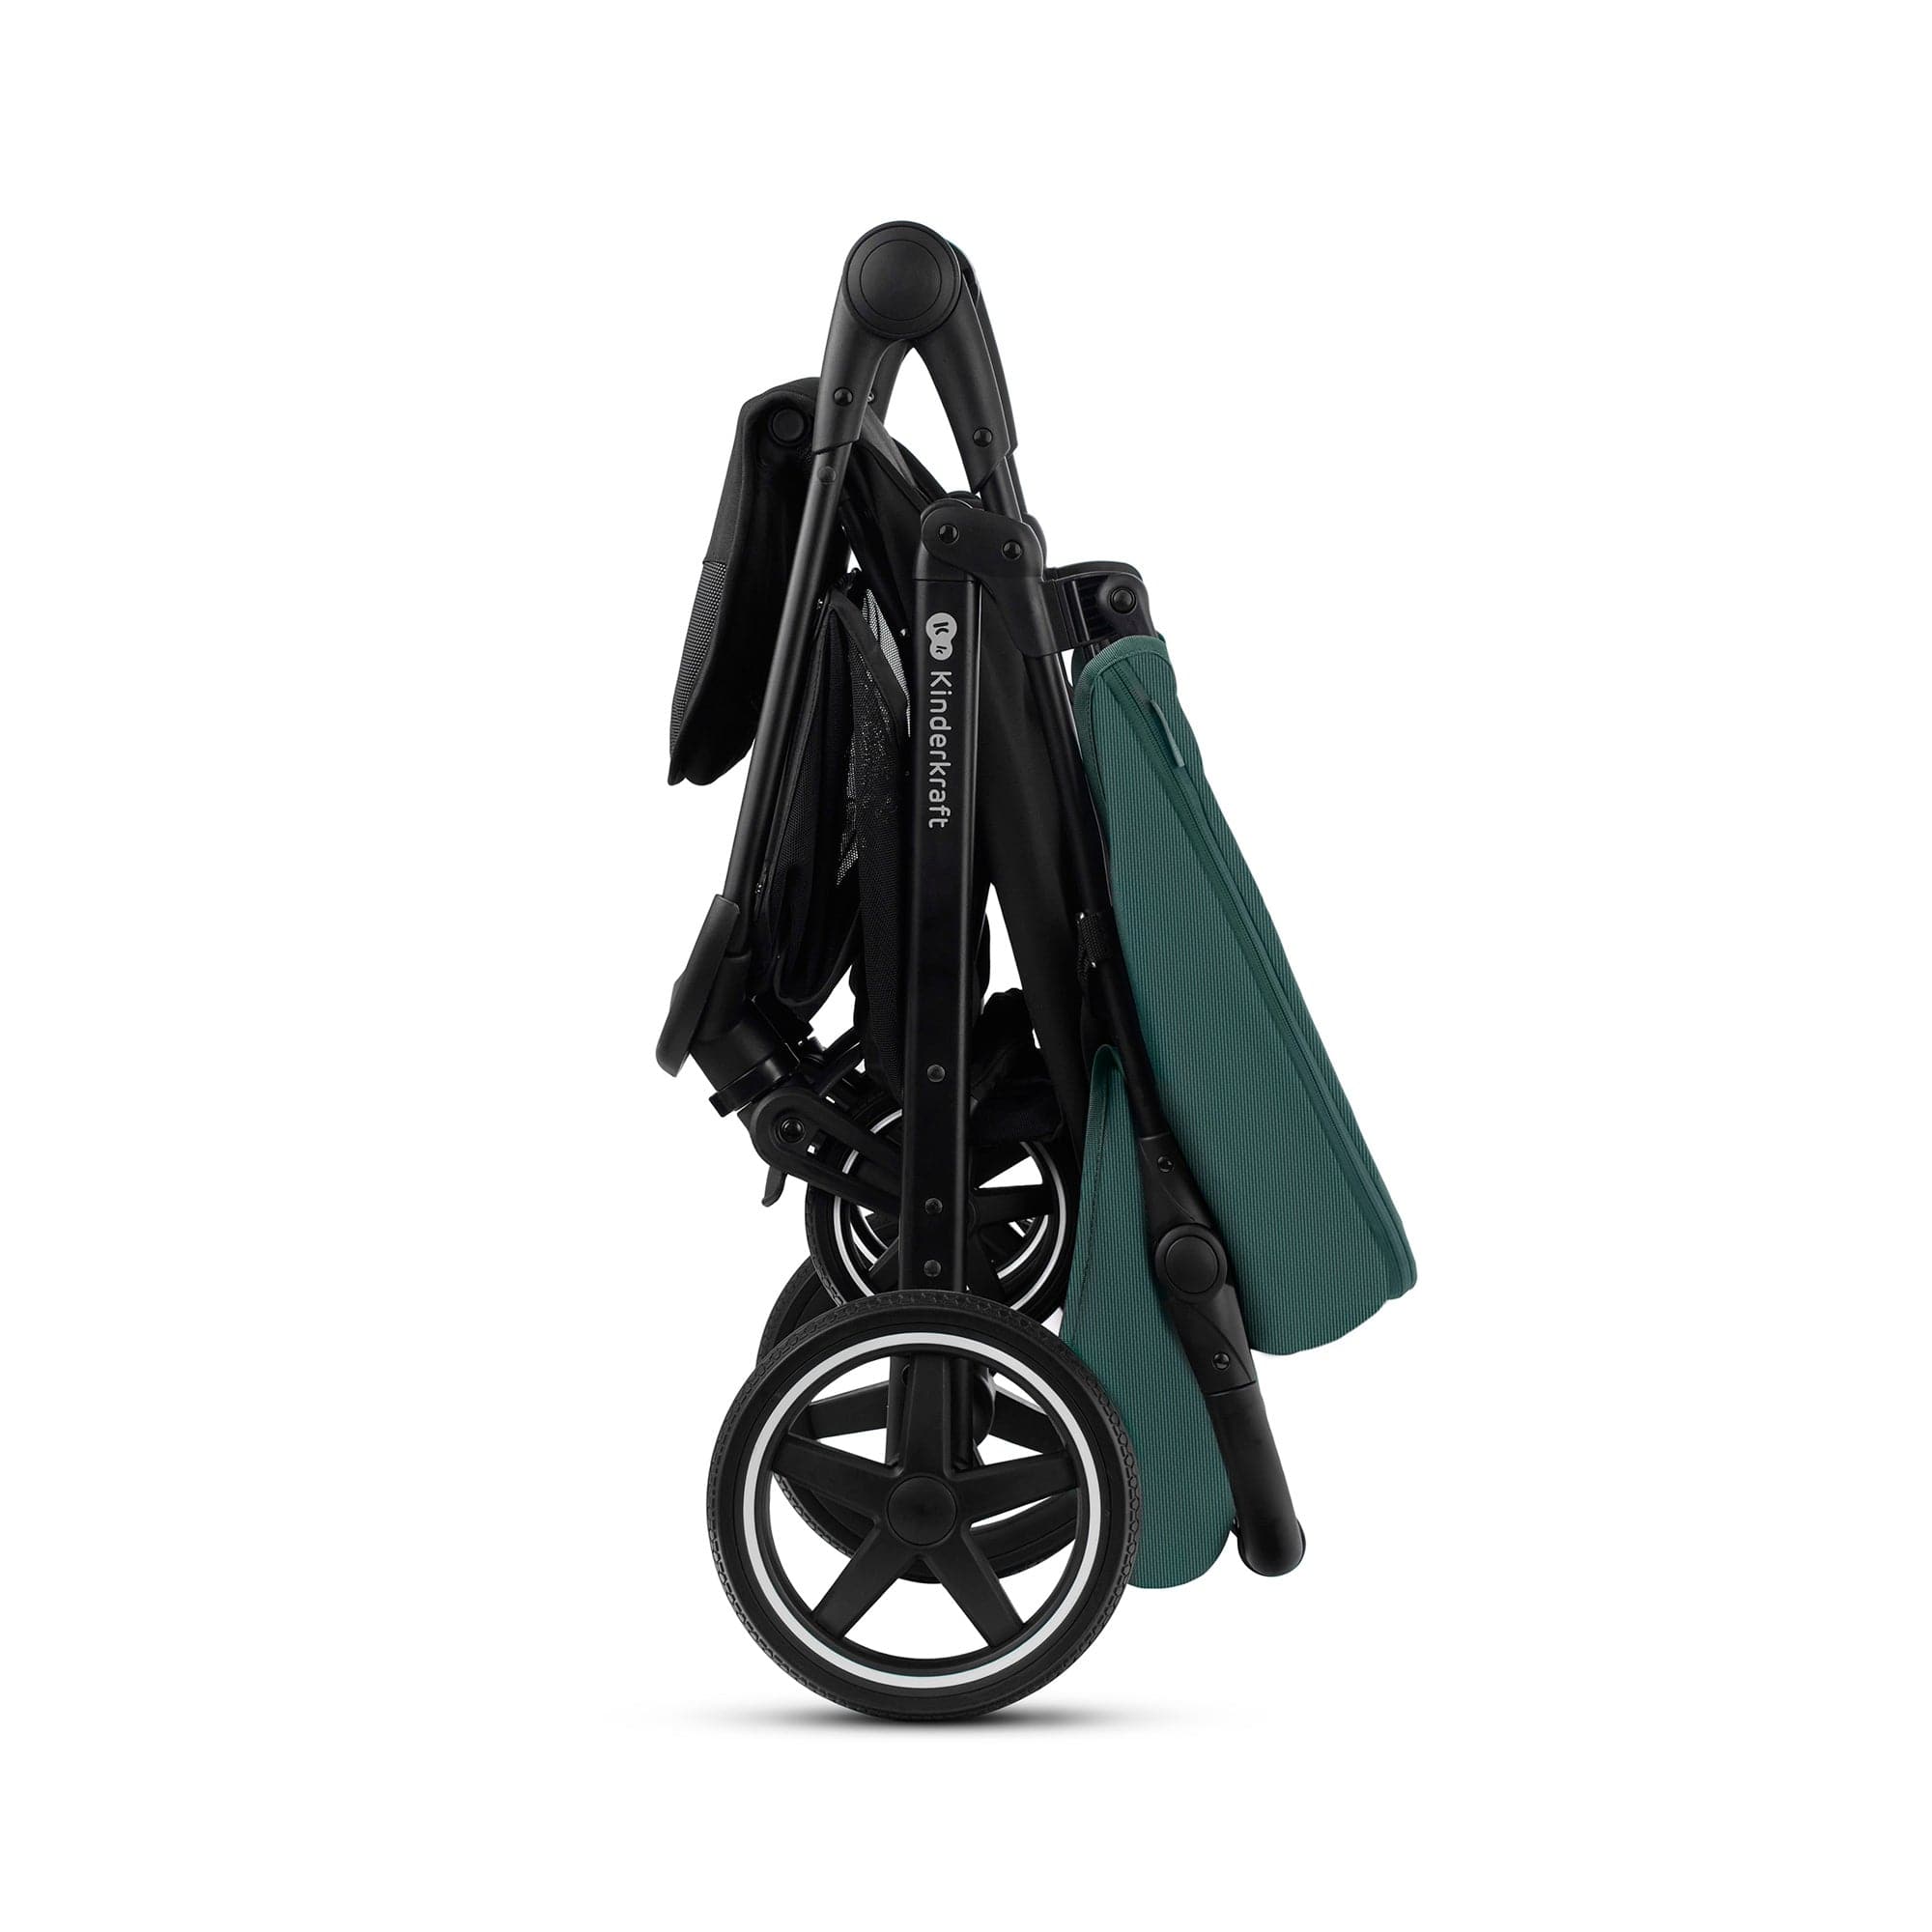 Kinderkraft pushchair Route - Green -  | For Your Little One